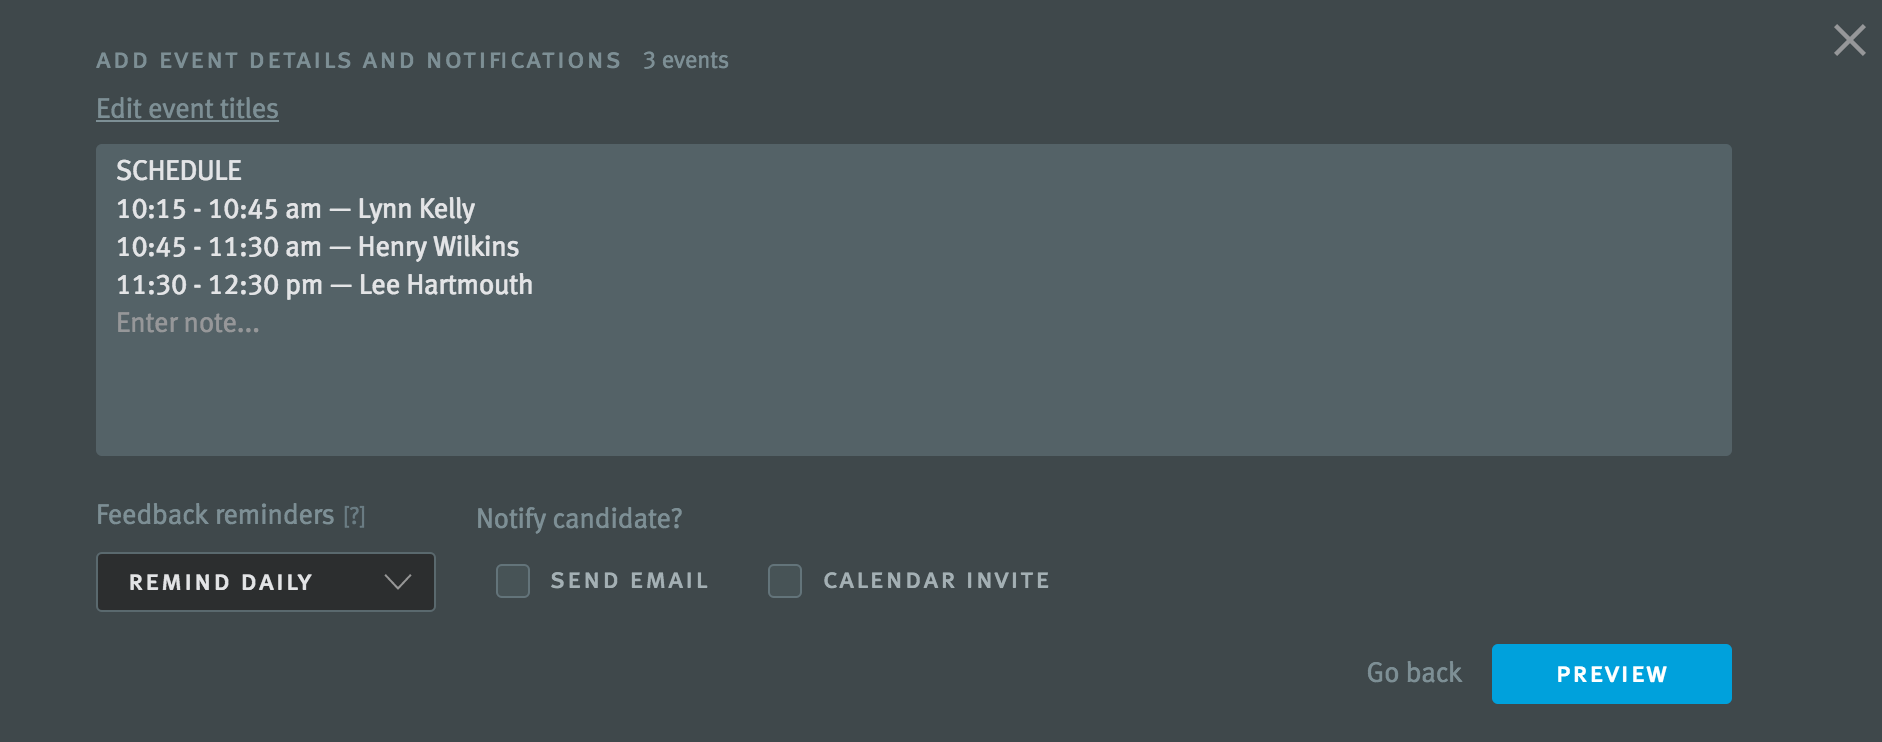 Event details and notifications screen in Lever interview scheduler.